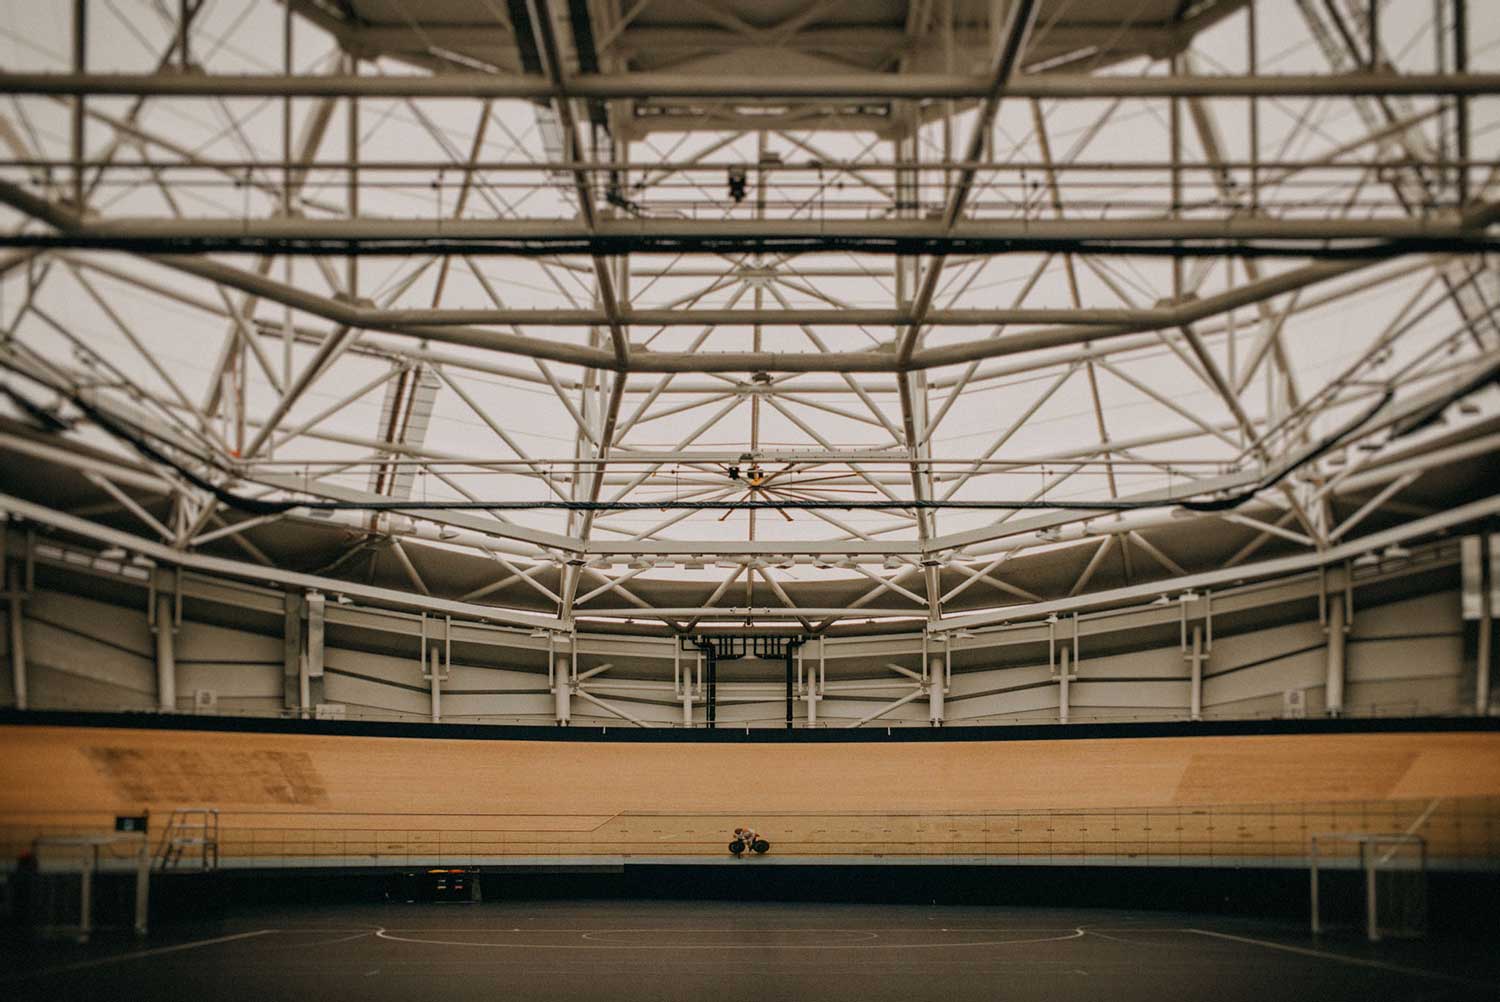 Japanese cyclist trains alone in the indoor velodrome